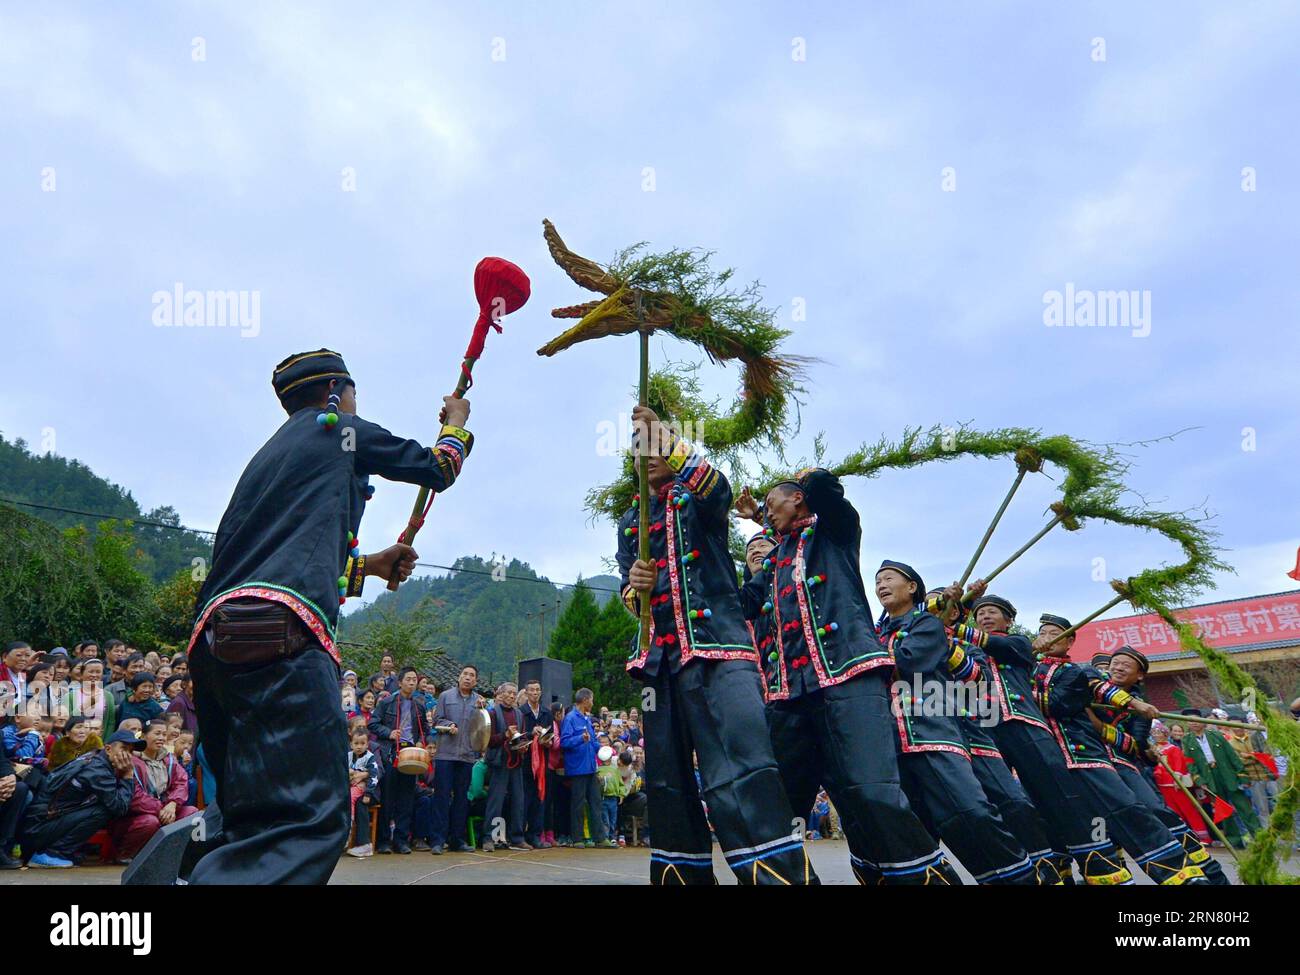 (150928) -- ENSHI, Sept. 28, 2015 -- People of Tujia Ethnicity celebrate Mid-Autumn Festival with straw dragon dance in Longtan village, Xuan en county, Enshi, Hubei Province, Sept. 27, 2015. The straw dragon dance was originally a ritual event of Tujia Ethnicity, and was listed in the Provincial intangible cultural heritage of Hubei in 2013. ) (dhf) CHINA-HUBEI-ENSHI-TUJIA ETHNICITY-MID-AUTUMN FESTIVAL (CN) SongxWen PUBLICATIONxNOTxINxCHN   Enshi Sept 28 2015 Celebrities of Tujia ethnicity Celebrate Mid Autumn Festival With Straw Dragon Dance in Longtan Village Xuan en County Enshi Hubei Prov Stock Photo